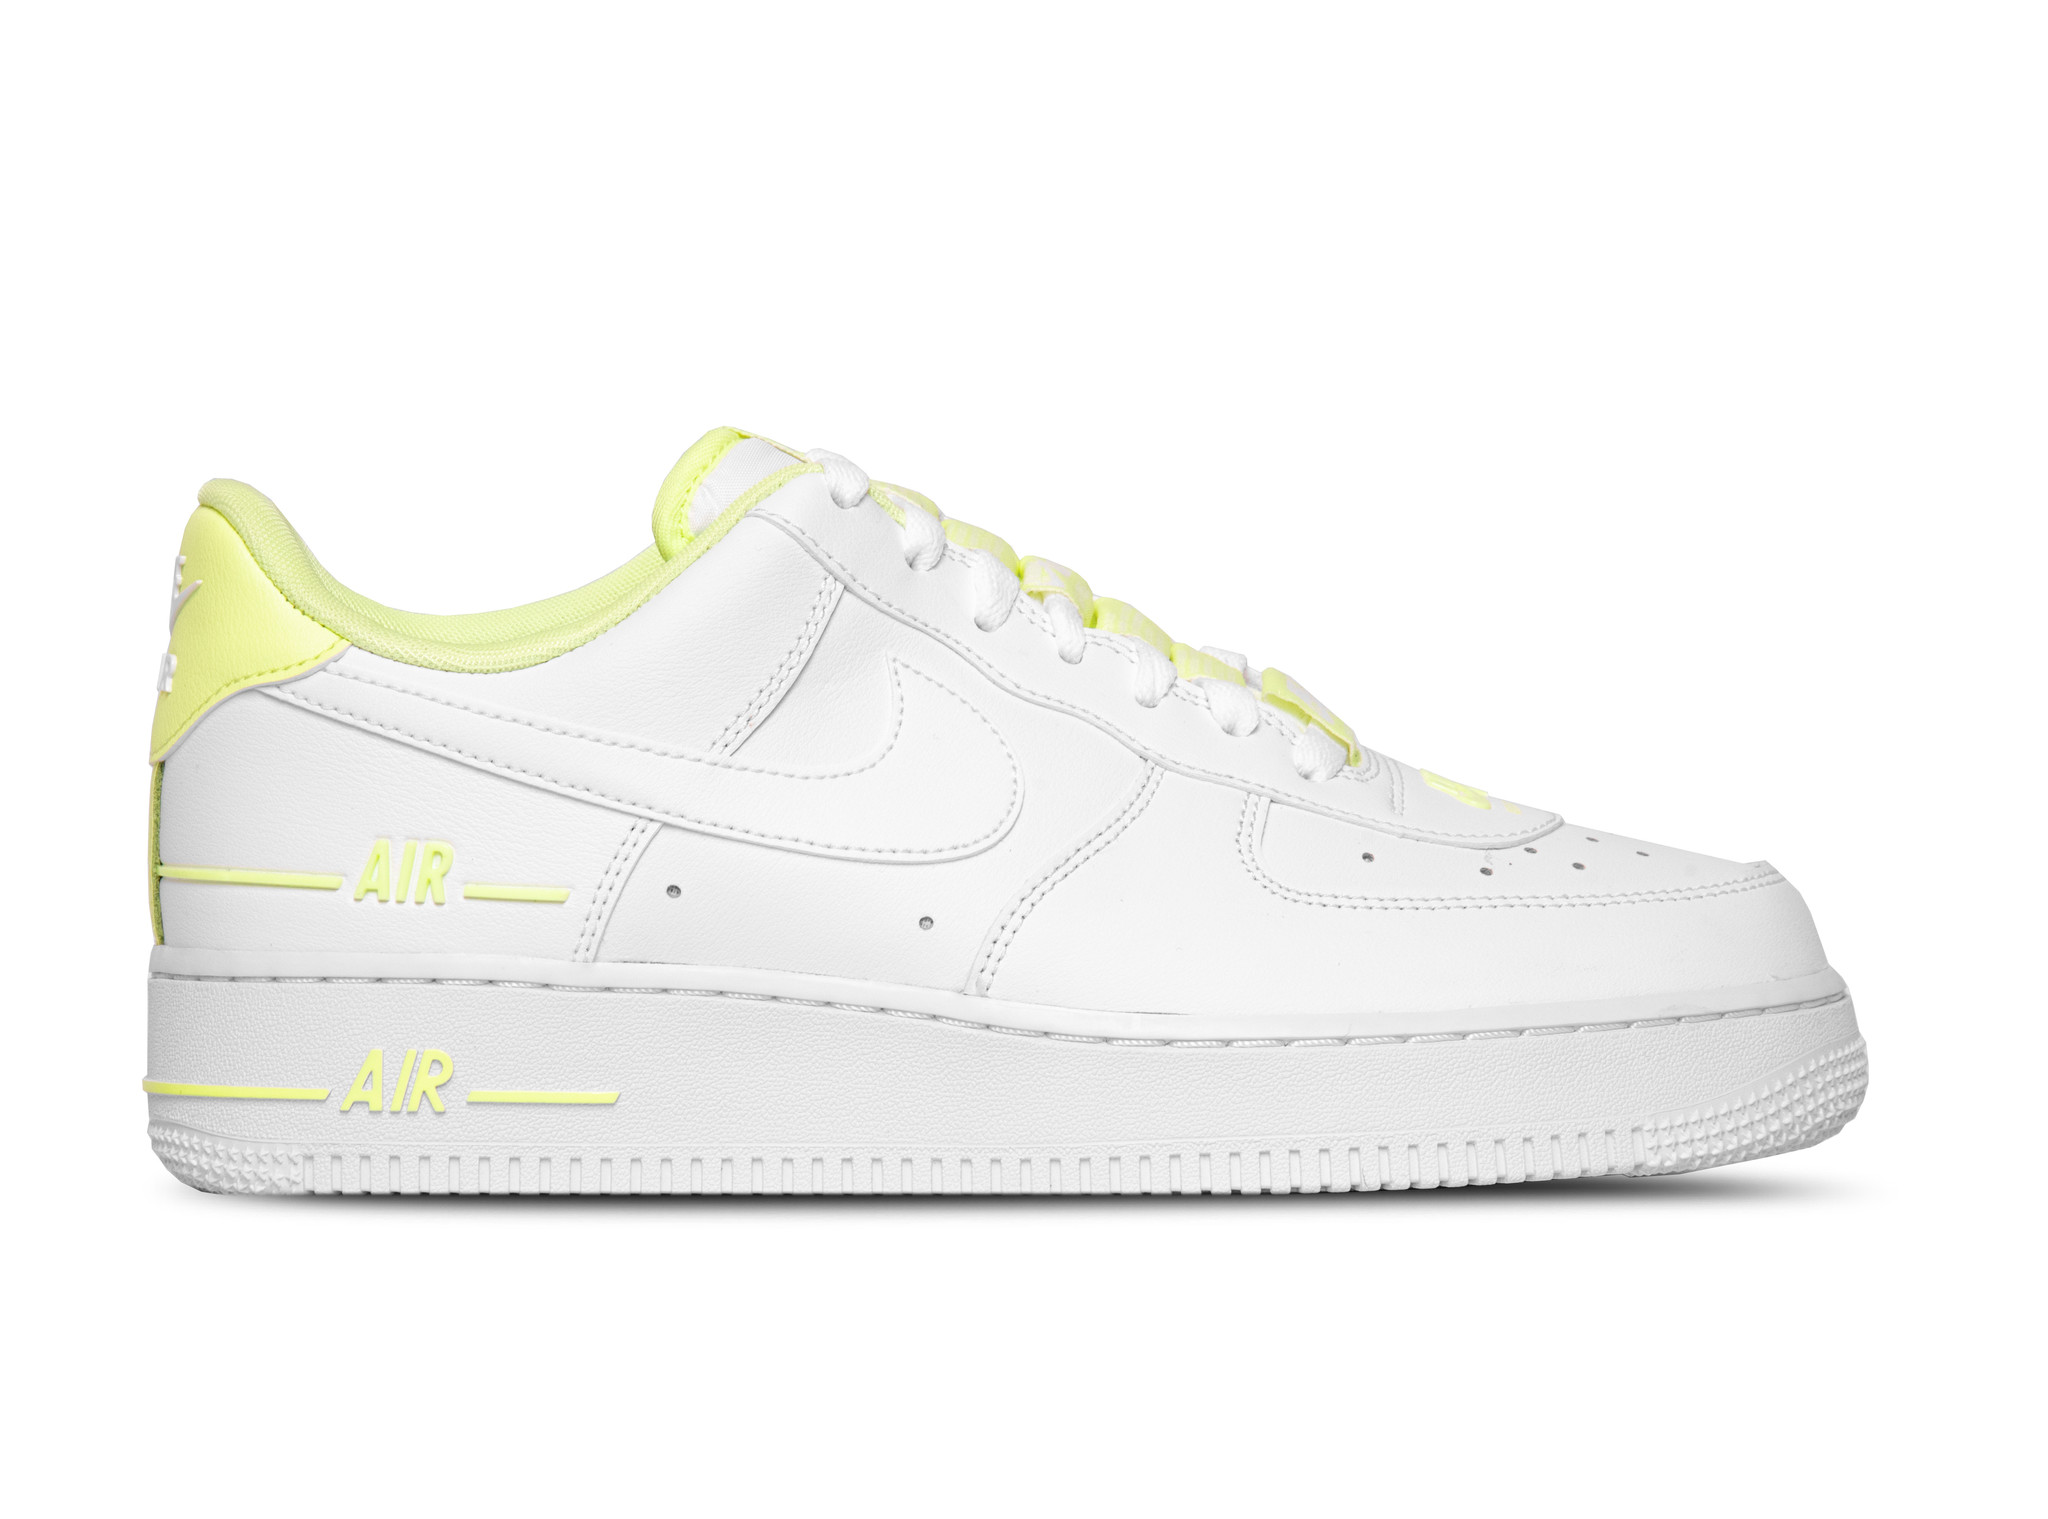 Nike Air Force 1 07 LV8 3 White Barely 